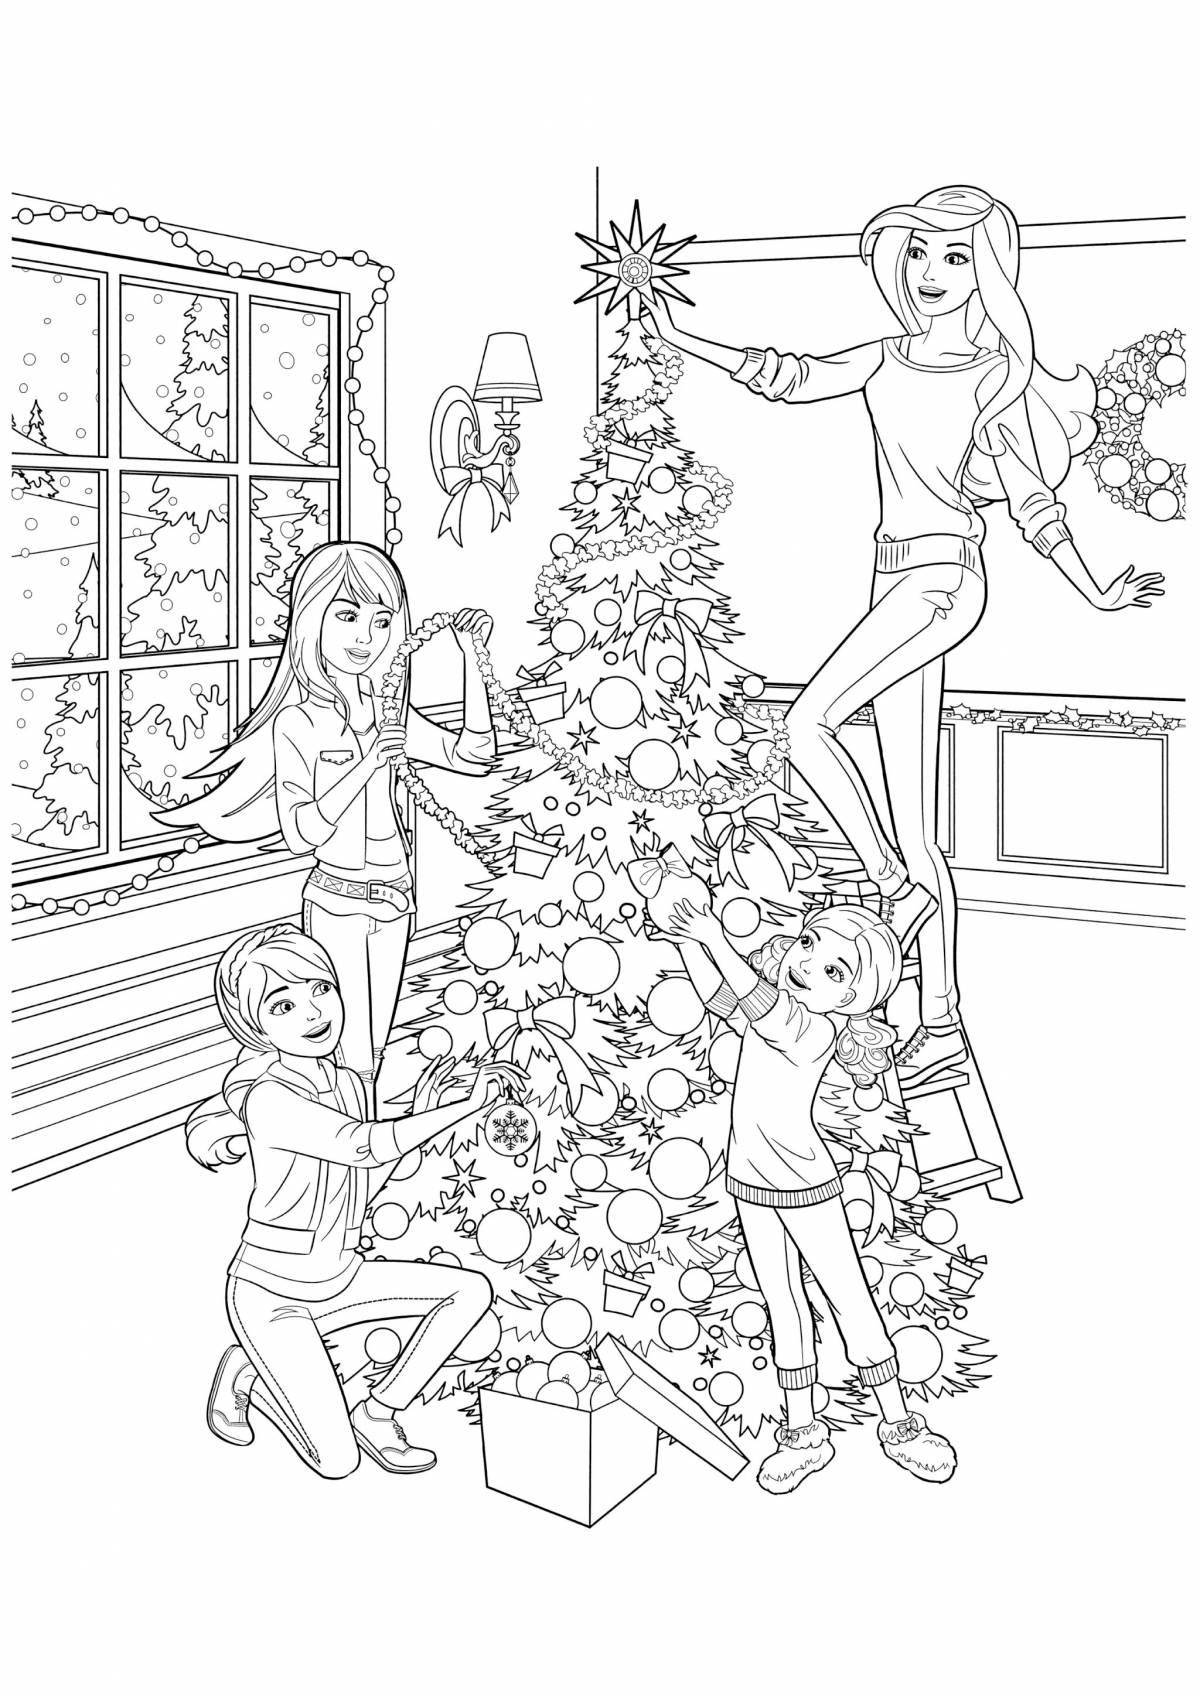 Cute Christmas coloring book for girls